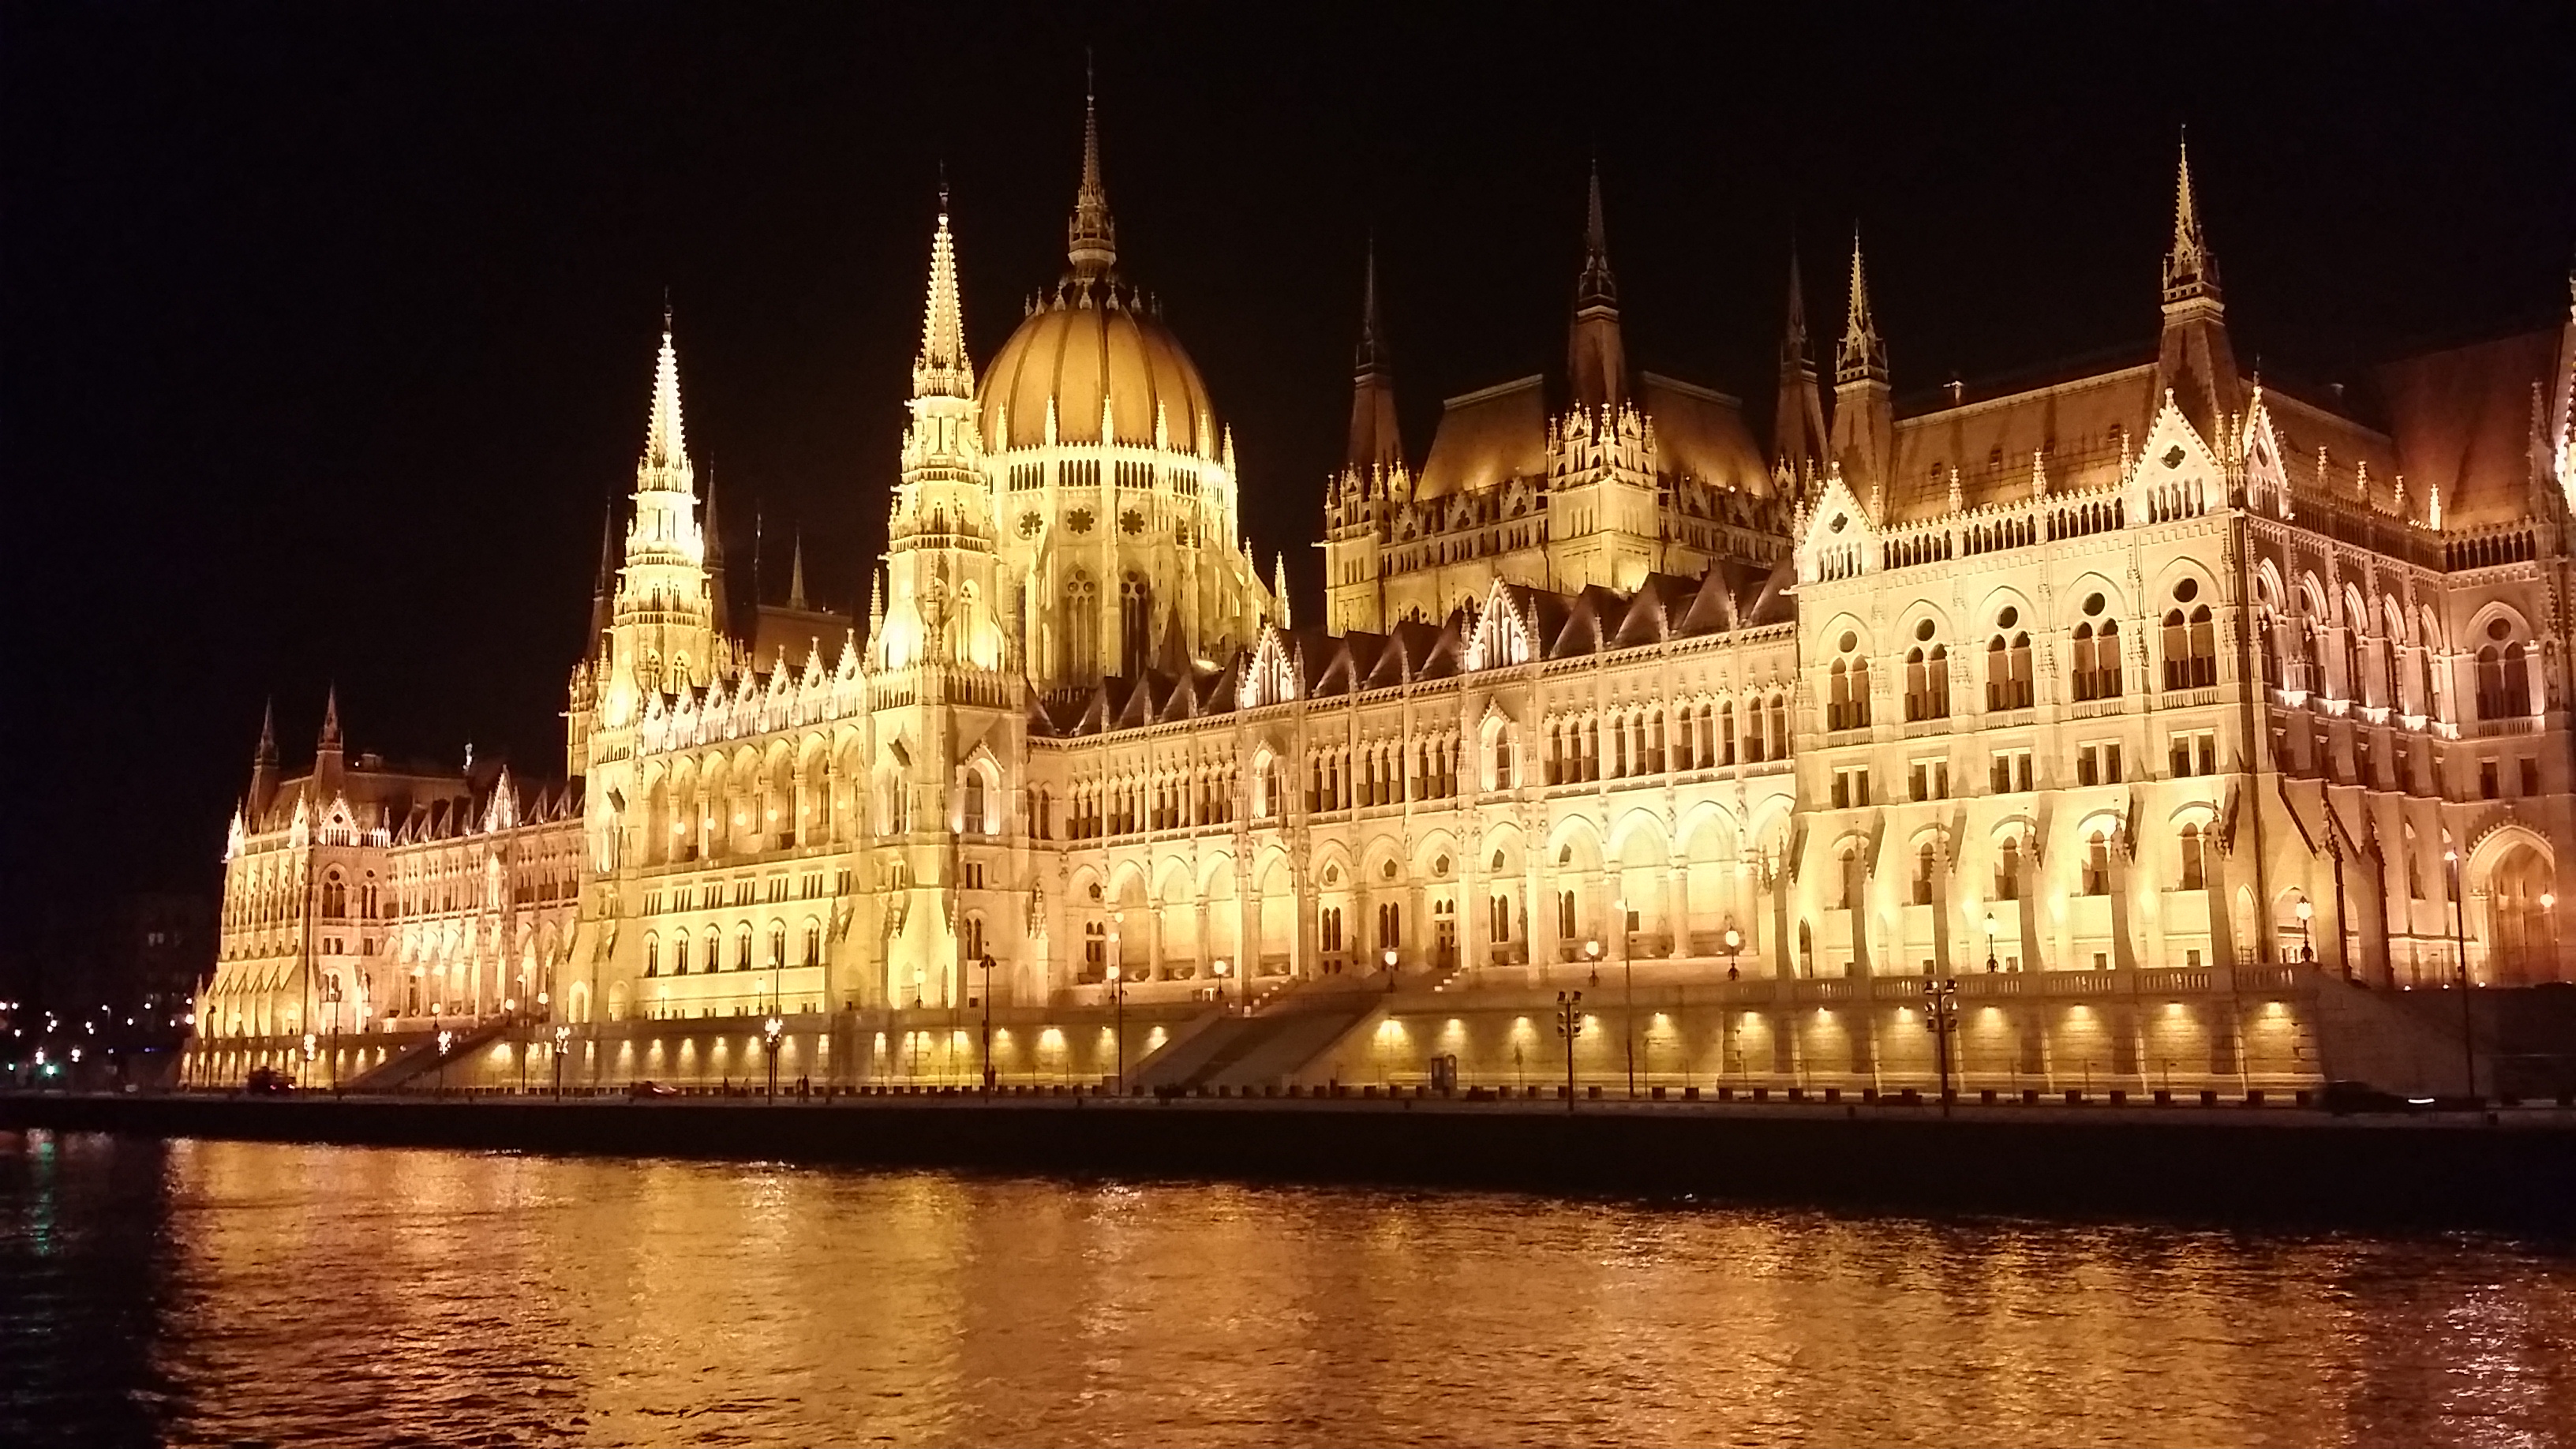 Third Prize (selected by votes at UR International display): After the 6 week Summer School Program in Bielefeld, Germany, I had the pleasure of solo-travelling for two weeks. I took this picture of the Budapest Parliament building in Hungary at night, from a boat on the Danube River. Photo submitted by Jamie Wilk who participated in the Summer School Program in Bielefeld, Germany.